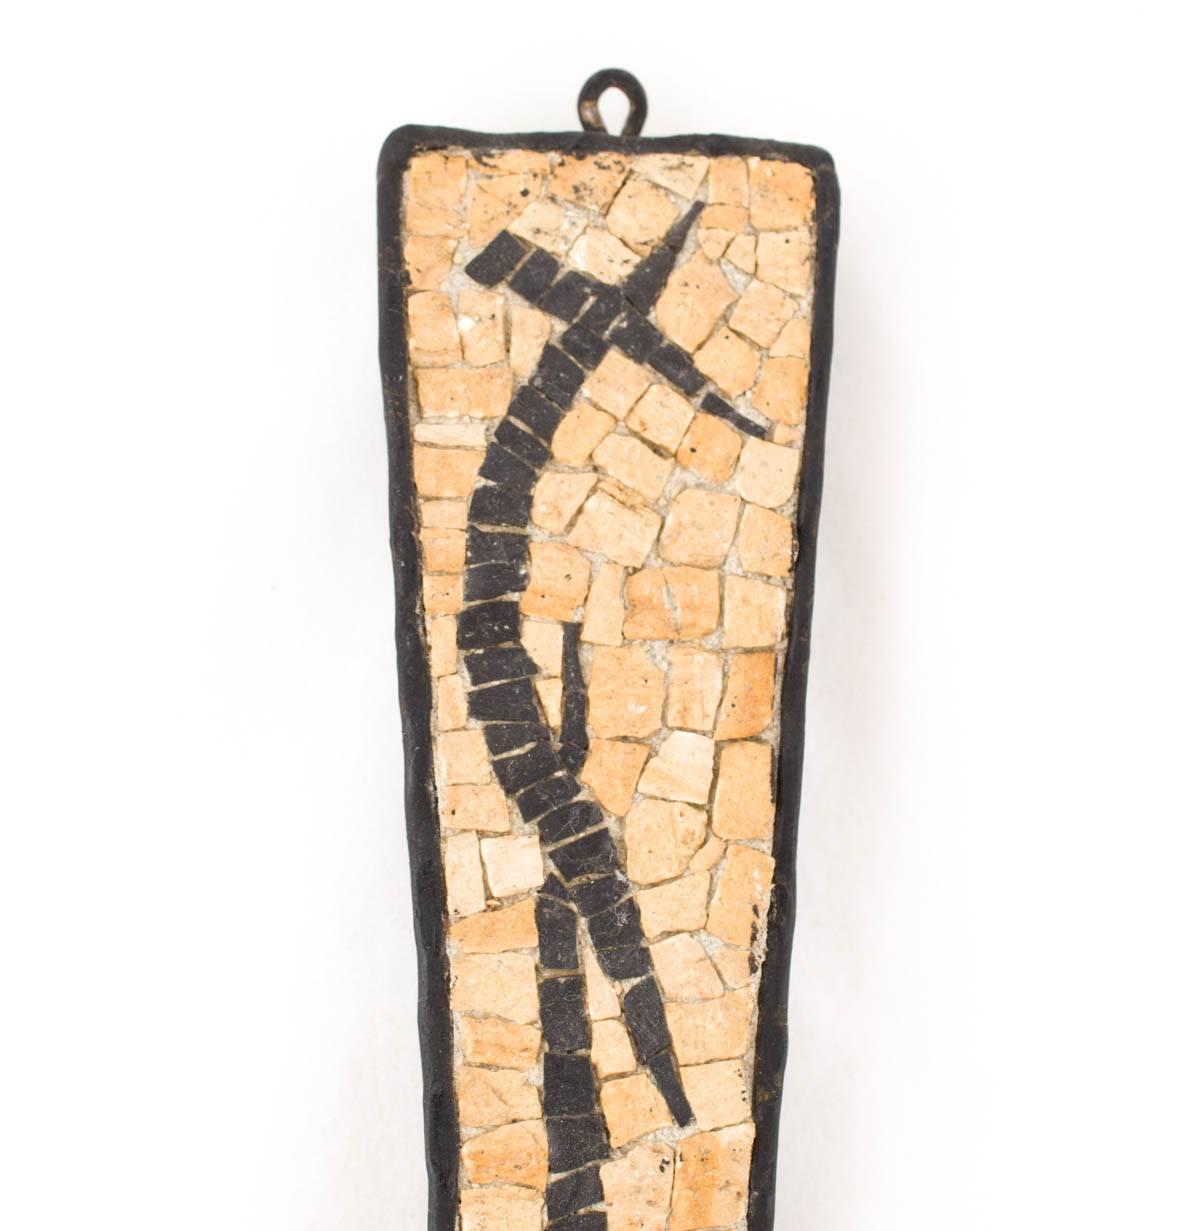 Hand Forged Iron  Stone Mosaic  Pricket Sconce Candelabra 
Holocaust Memorial Judaic Wall Sconce Sculpture


David Palombo was an Israeli sculptor and painter. He was born in Turkey to a traditional family and immigrated to the Land of Israel with